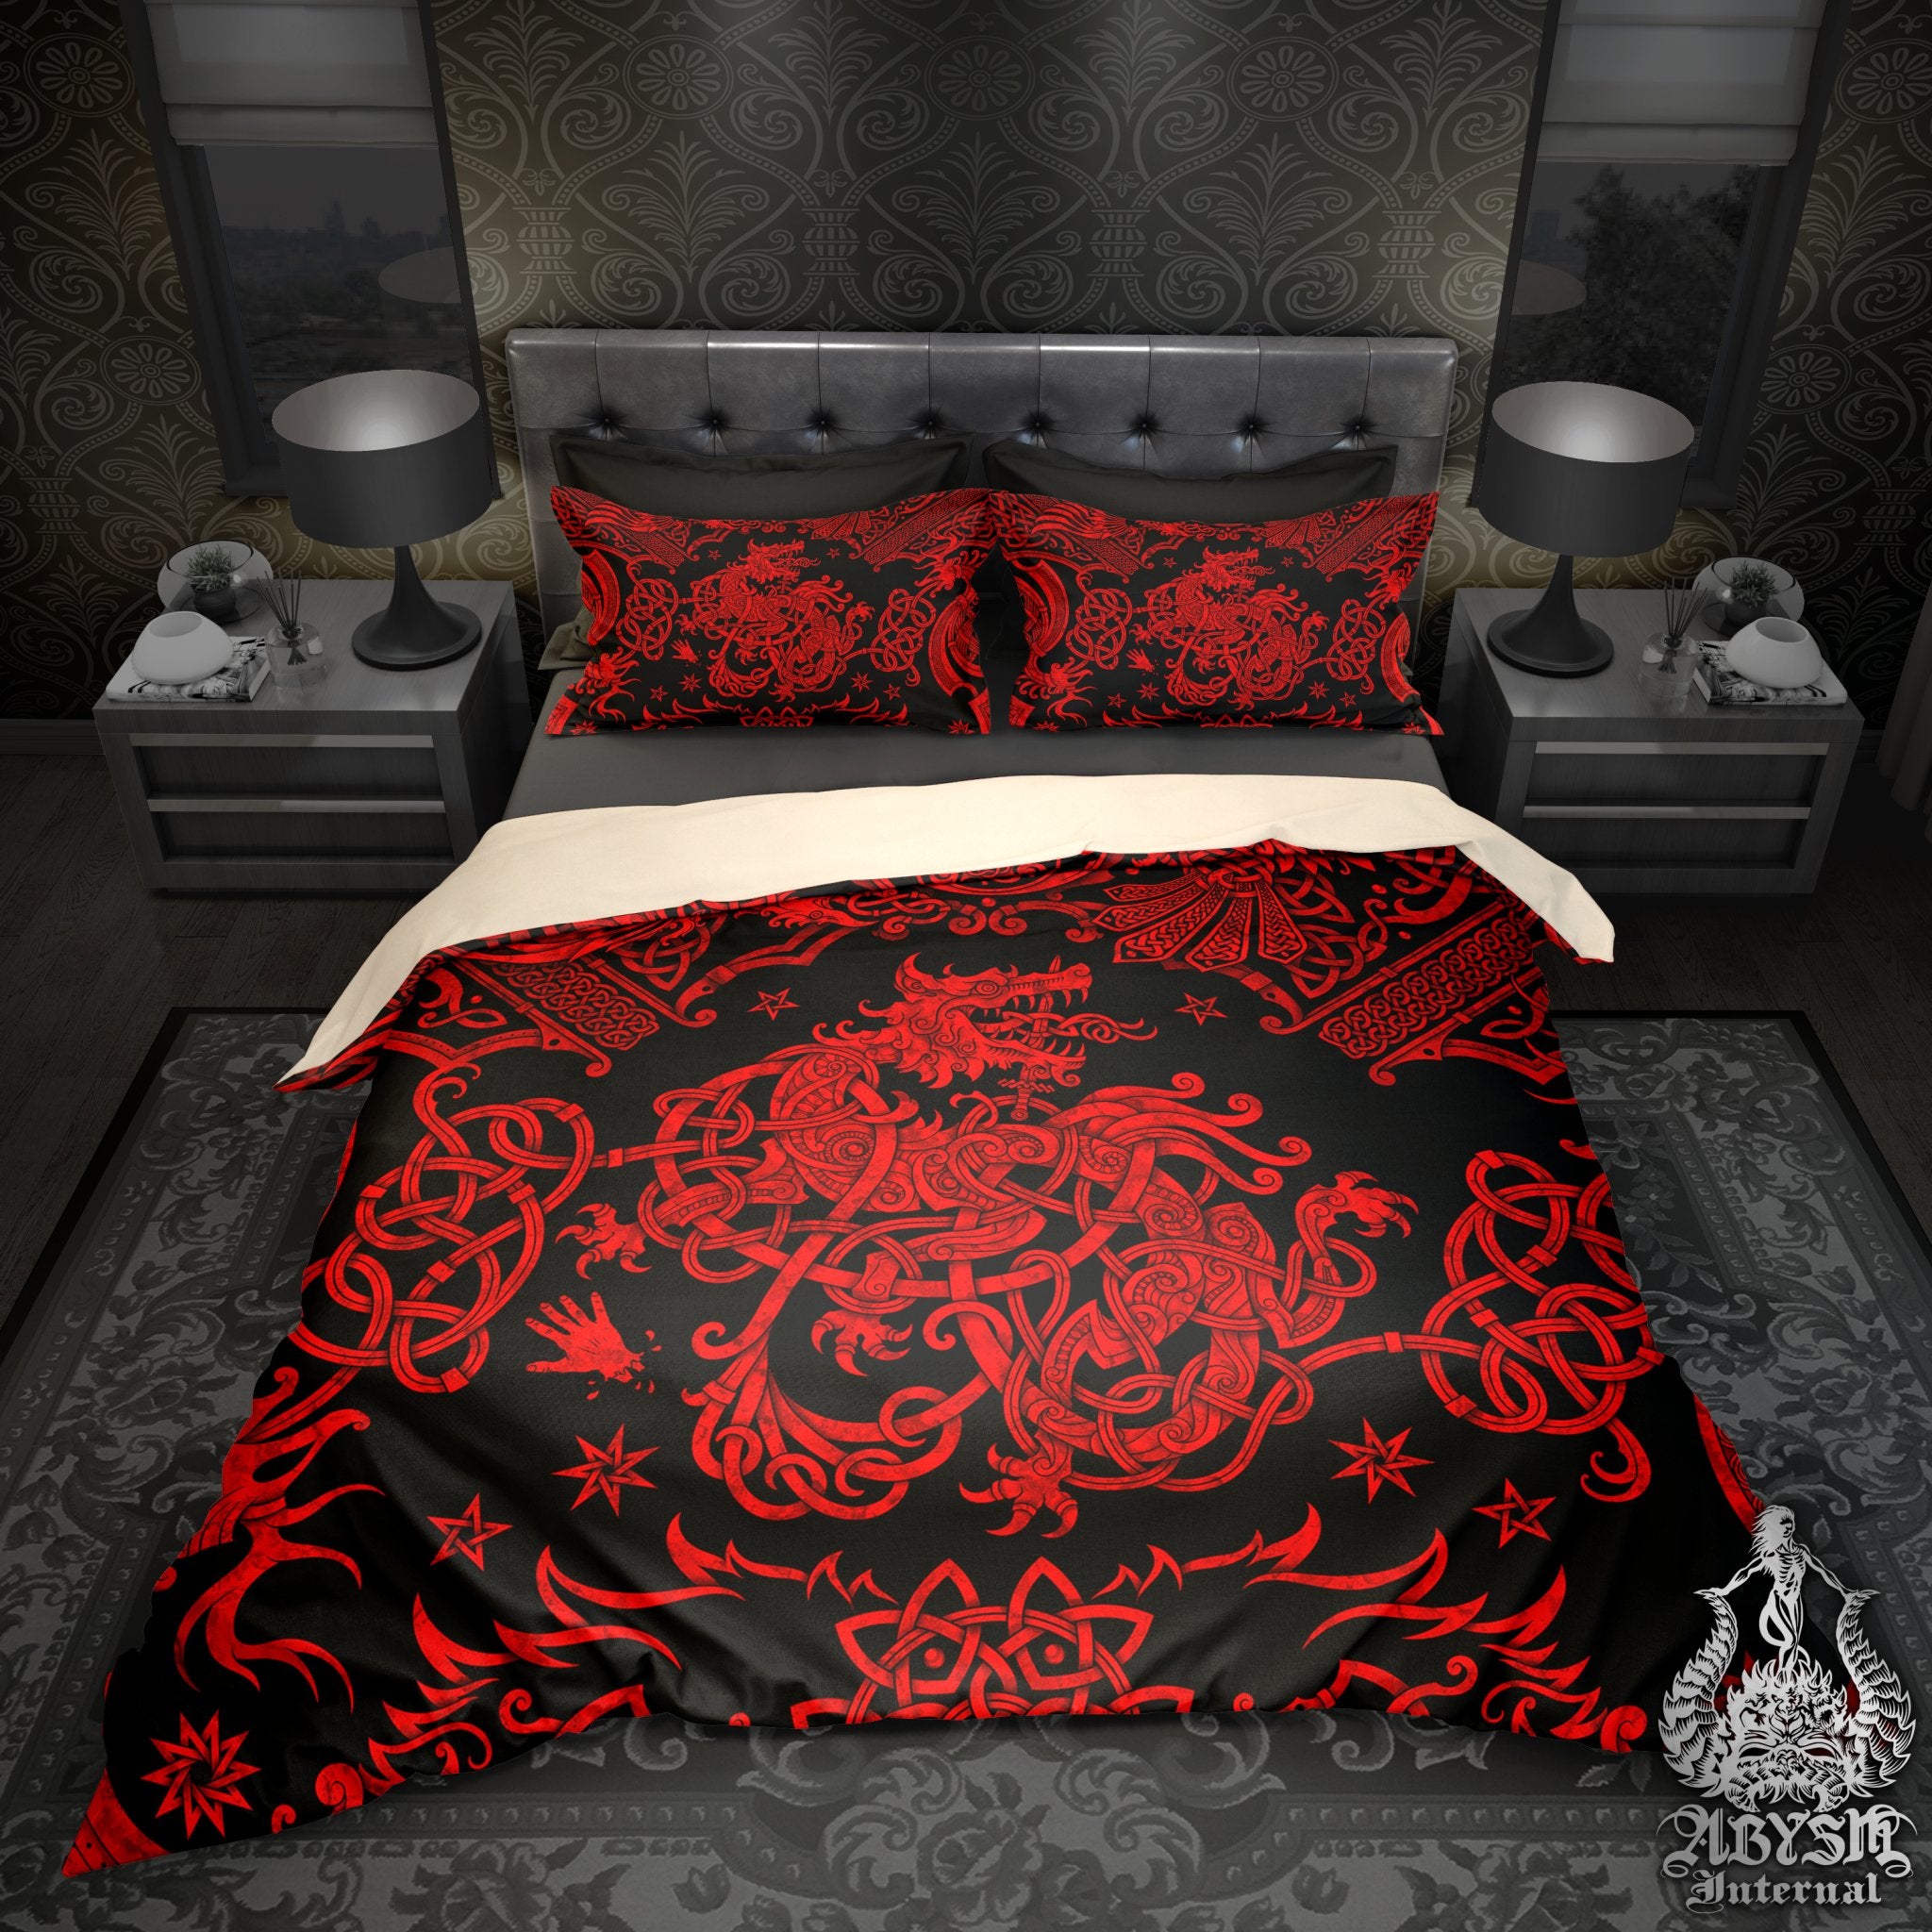 Norse Wolf Bedding Set, Comforter or Duvet, Viking Bed Cover and Bedroom Decor, Fenrir Art Print, King, Queen & Twin Size - Red Black - Abysm Internal